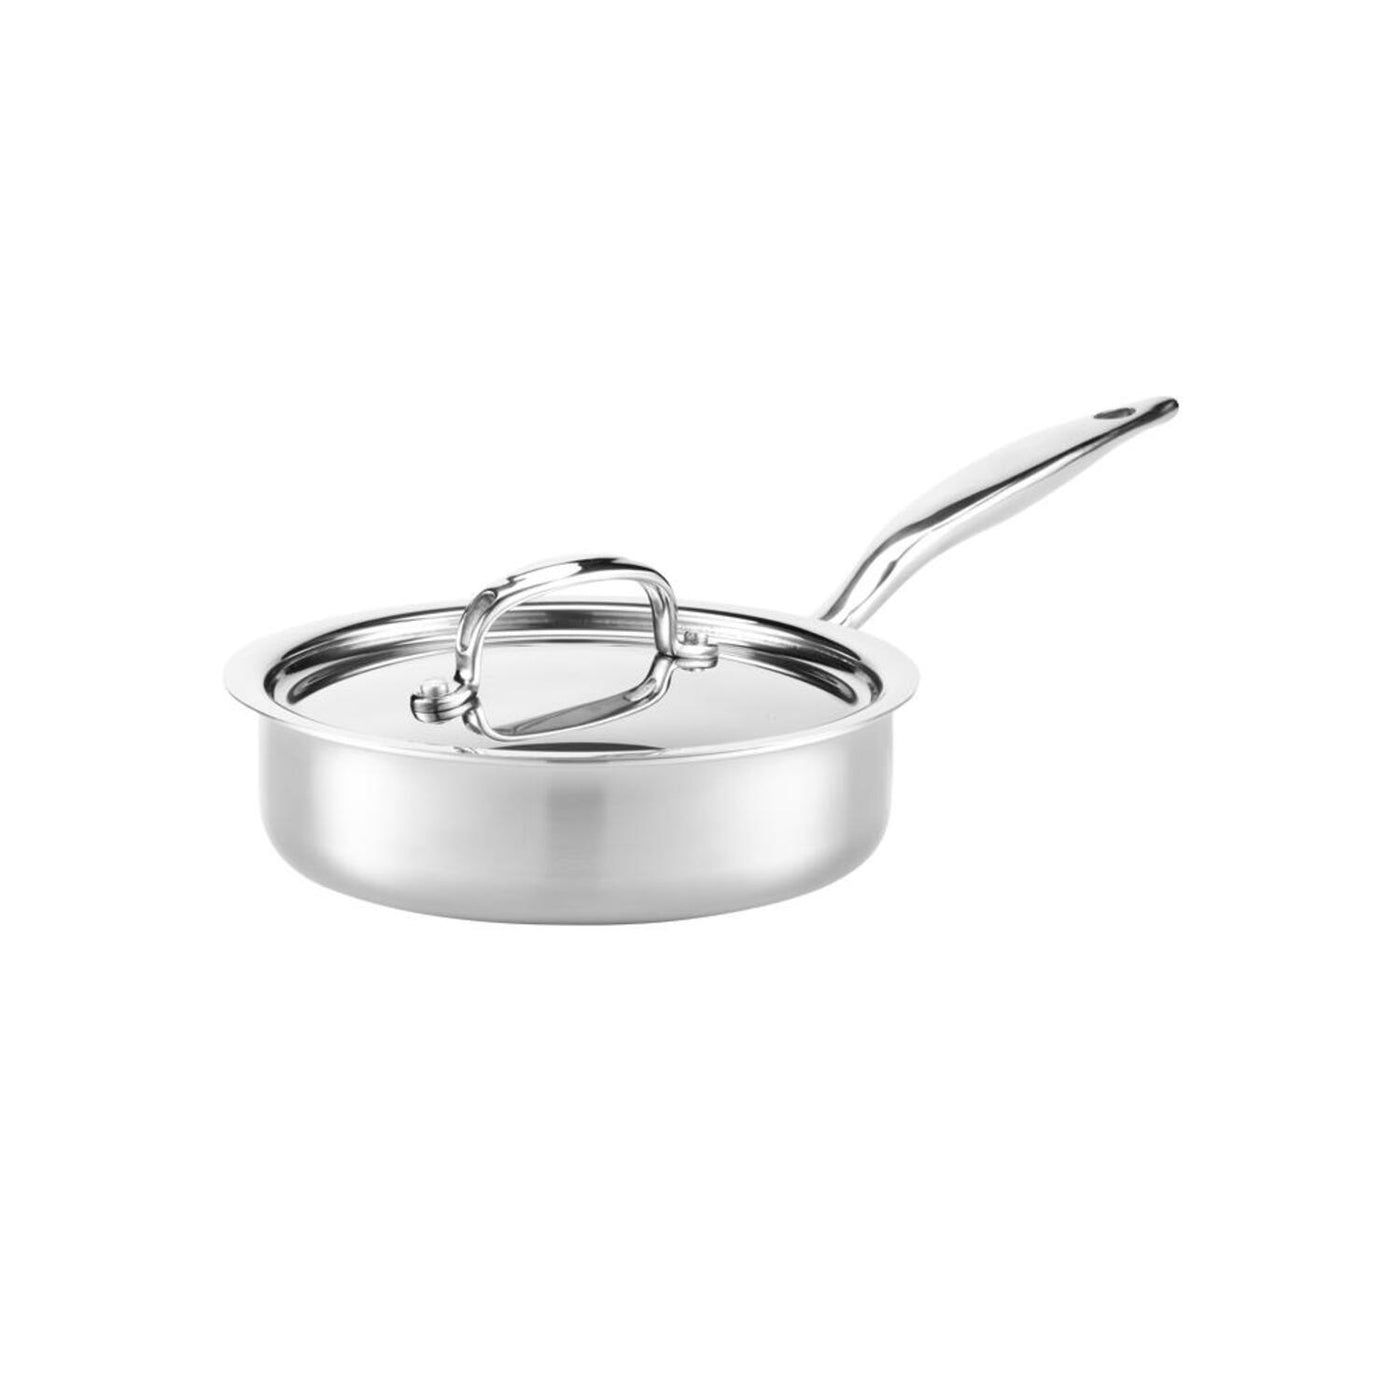 All-Clad D3 Stainless Steel SauteusePan - 3 QT Saute Pan With Lid